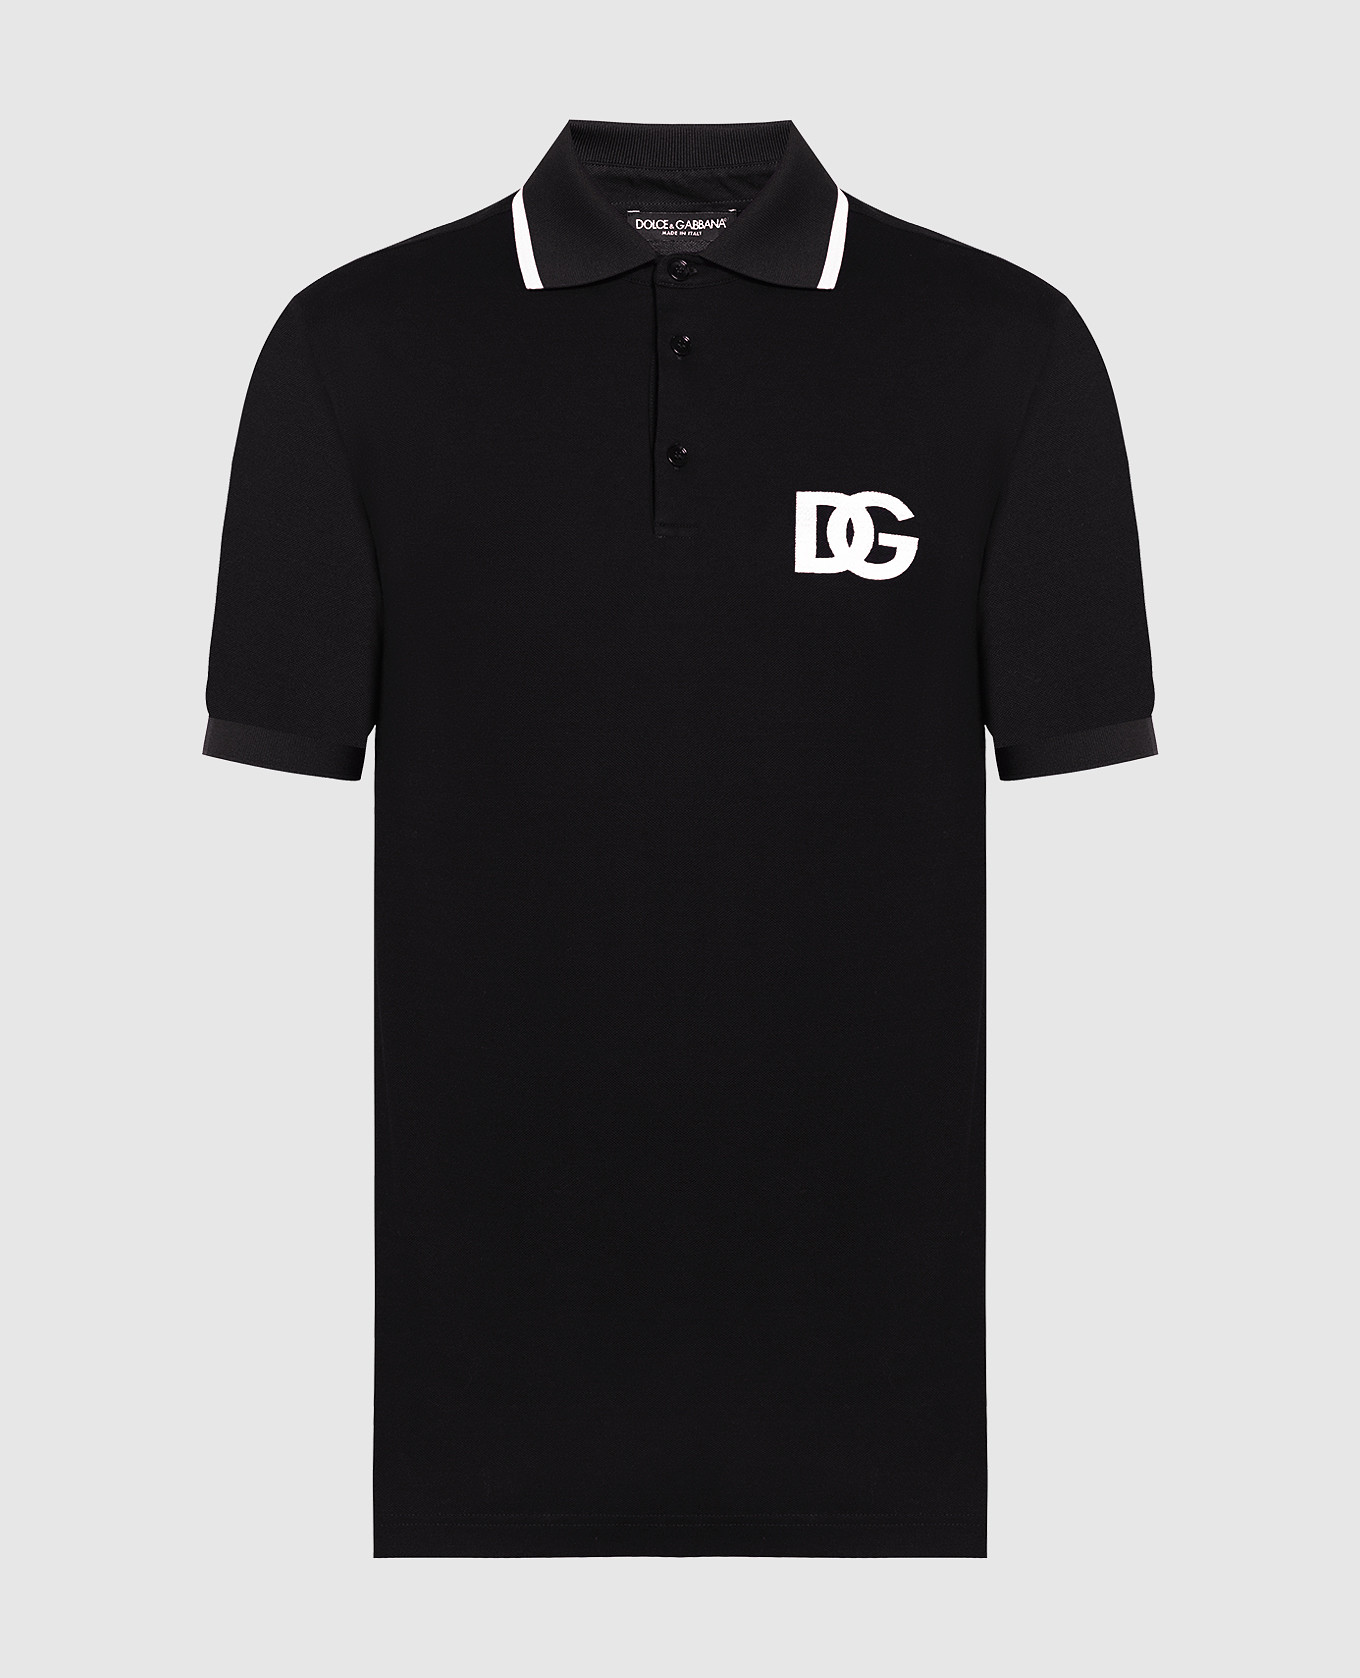 Black polo with DG logo embroidery